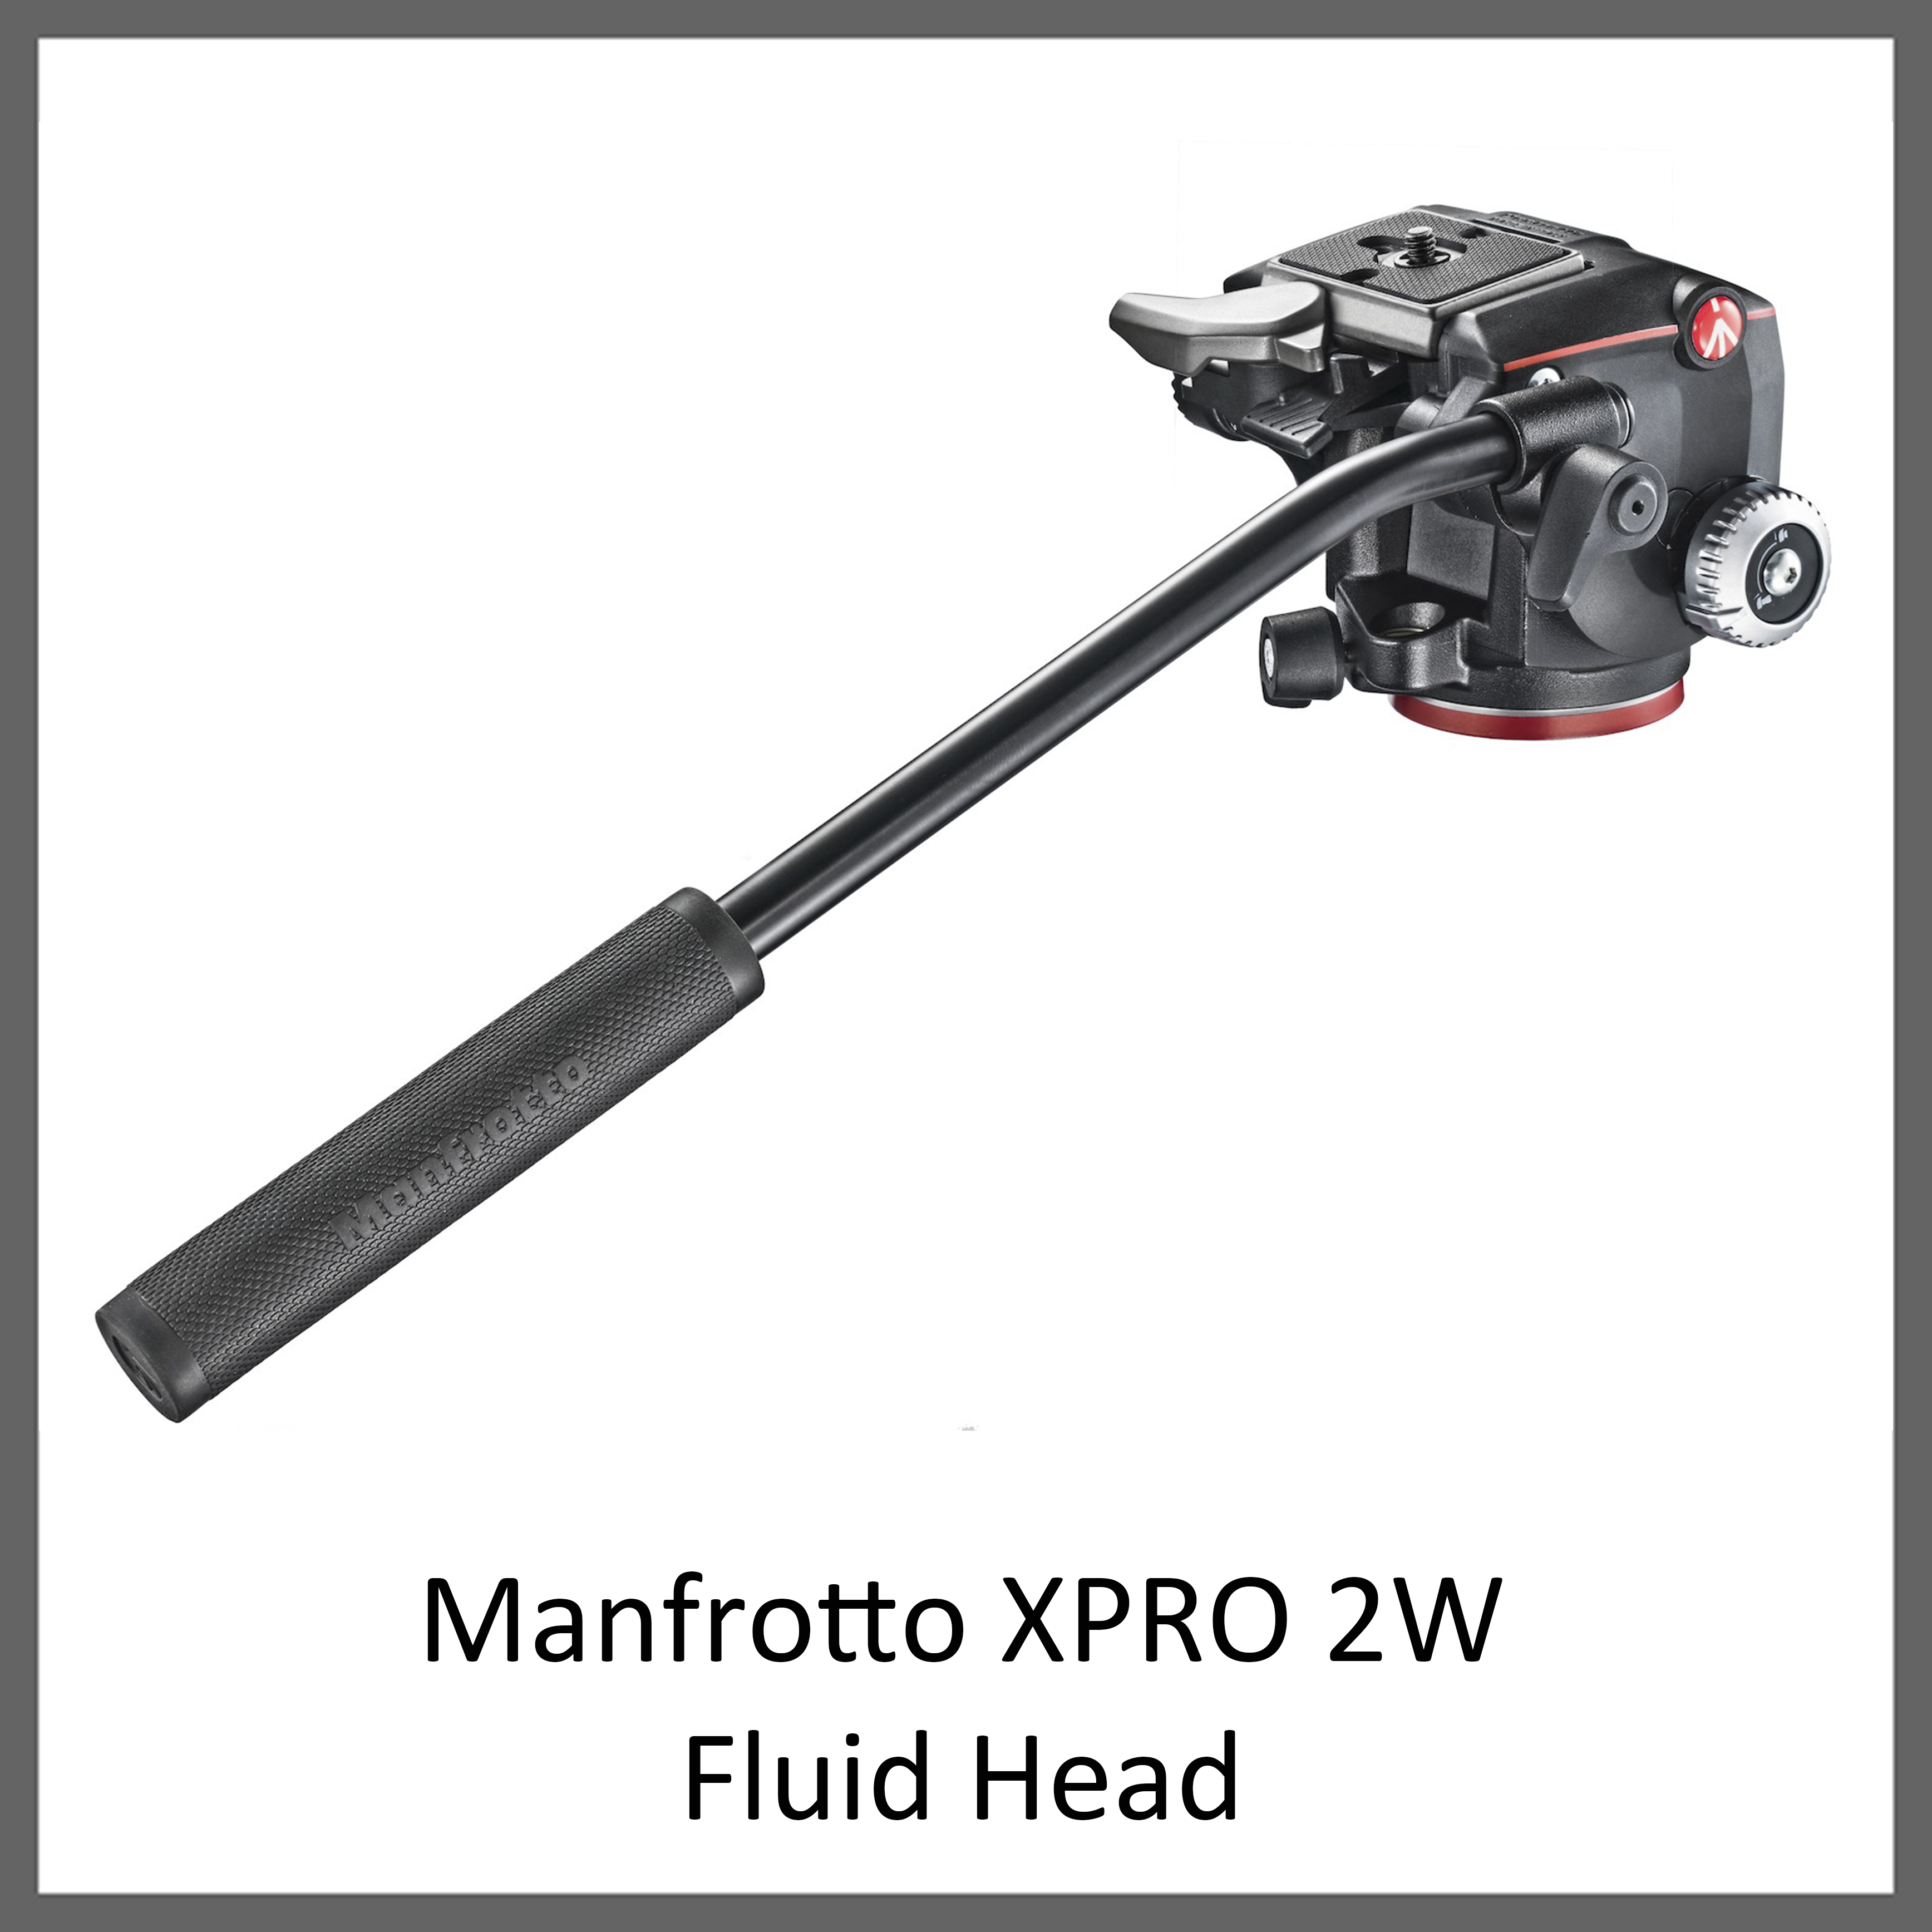 Manfrotto XPRO 2W Fluid Head